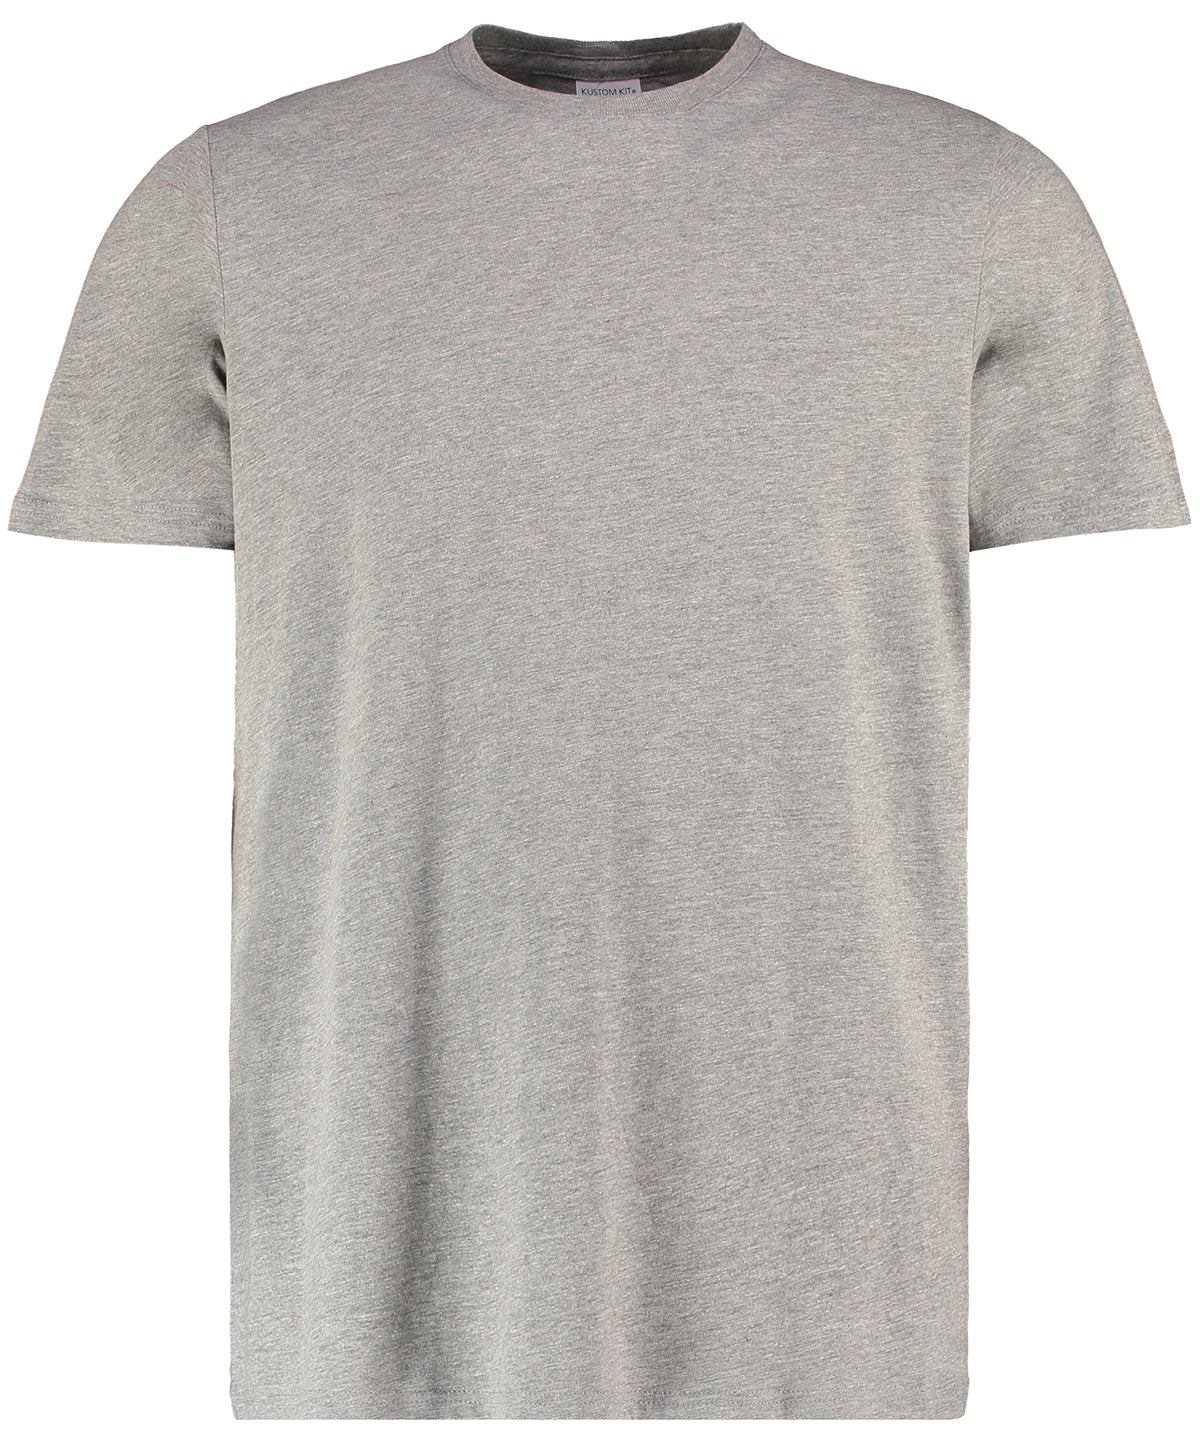 Fashion Fit Cotton Tee - COOZO